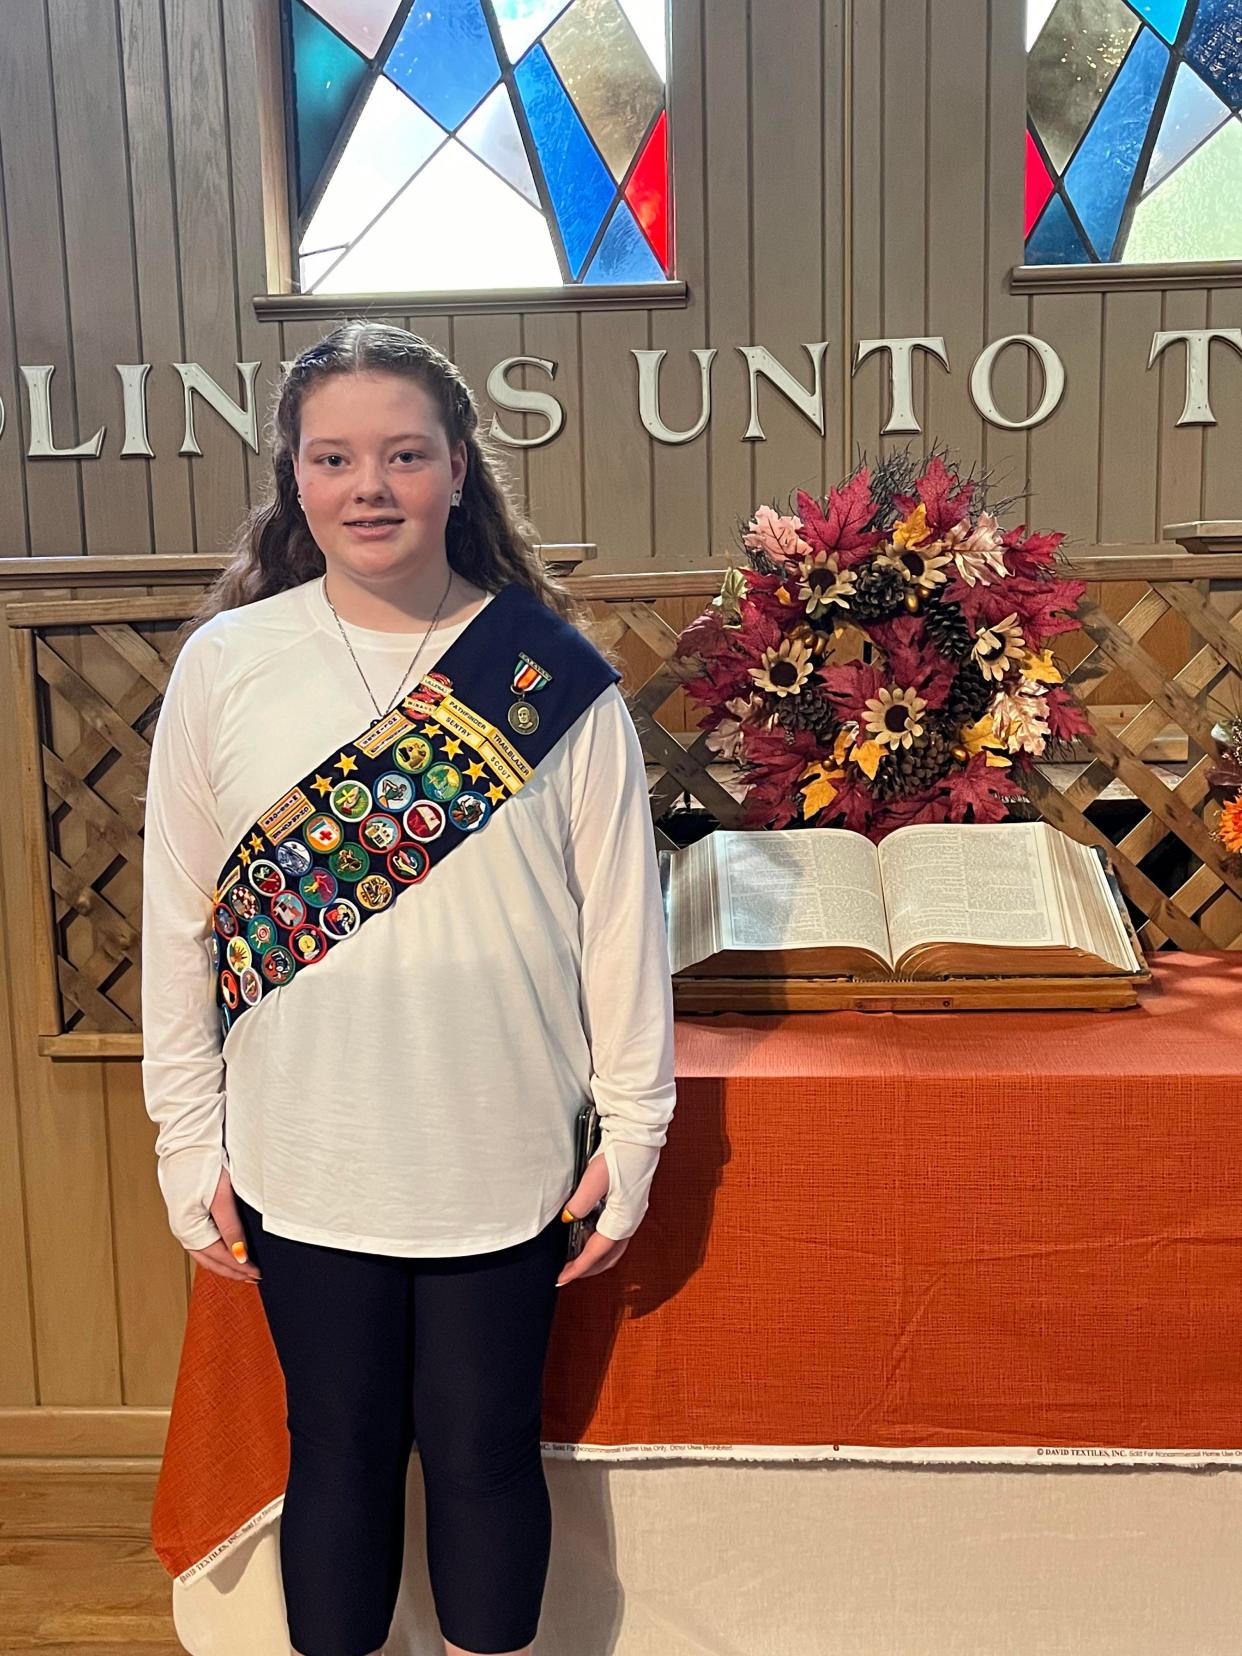 Maci French of Sebring received the Phineas F. Bresee Medal on Oct. 15 from Sebring First Church of the Nazarene.